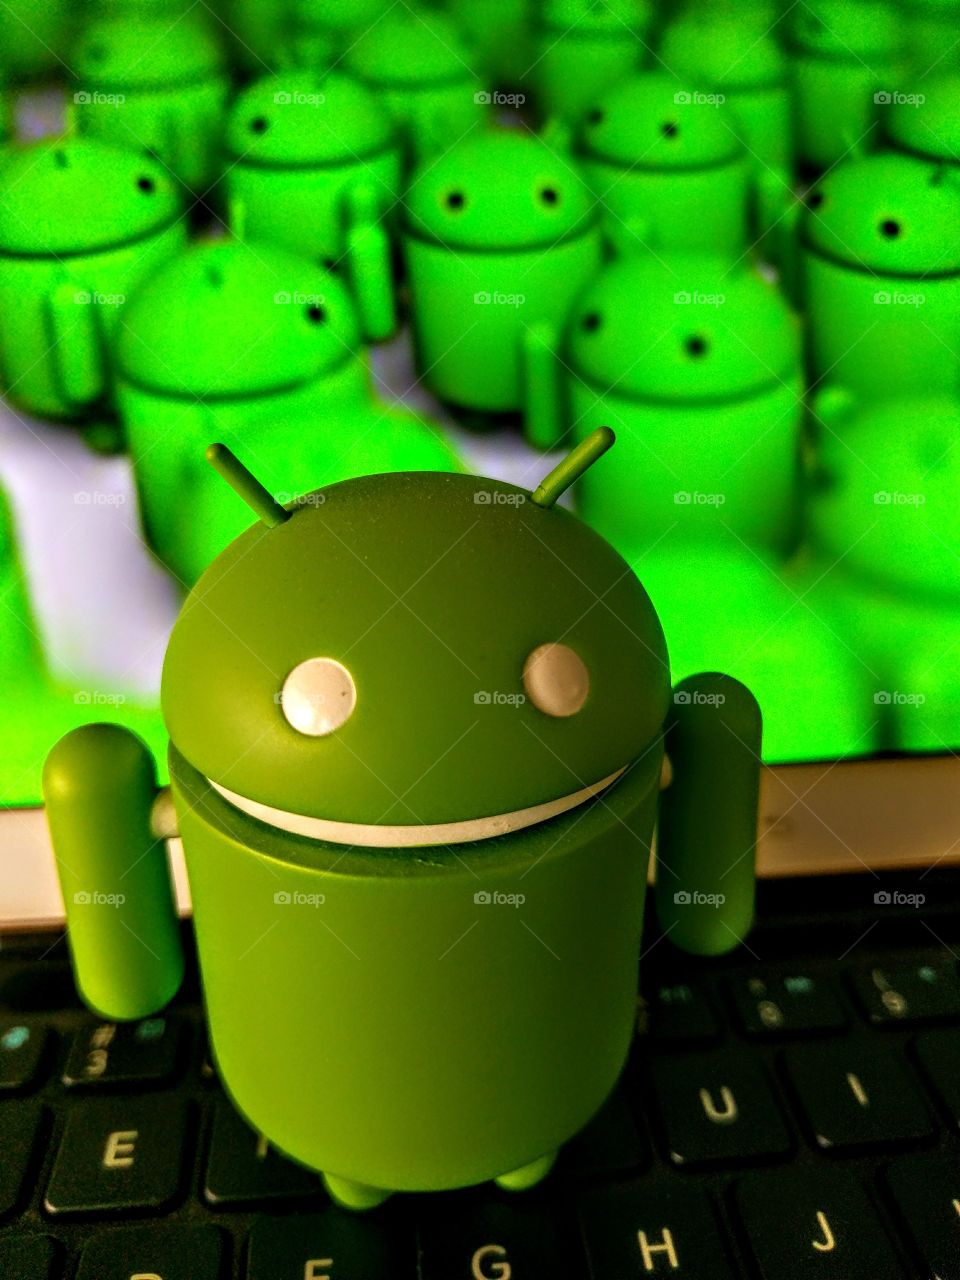 Android party!